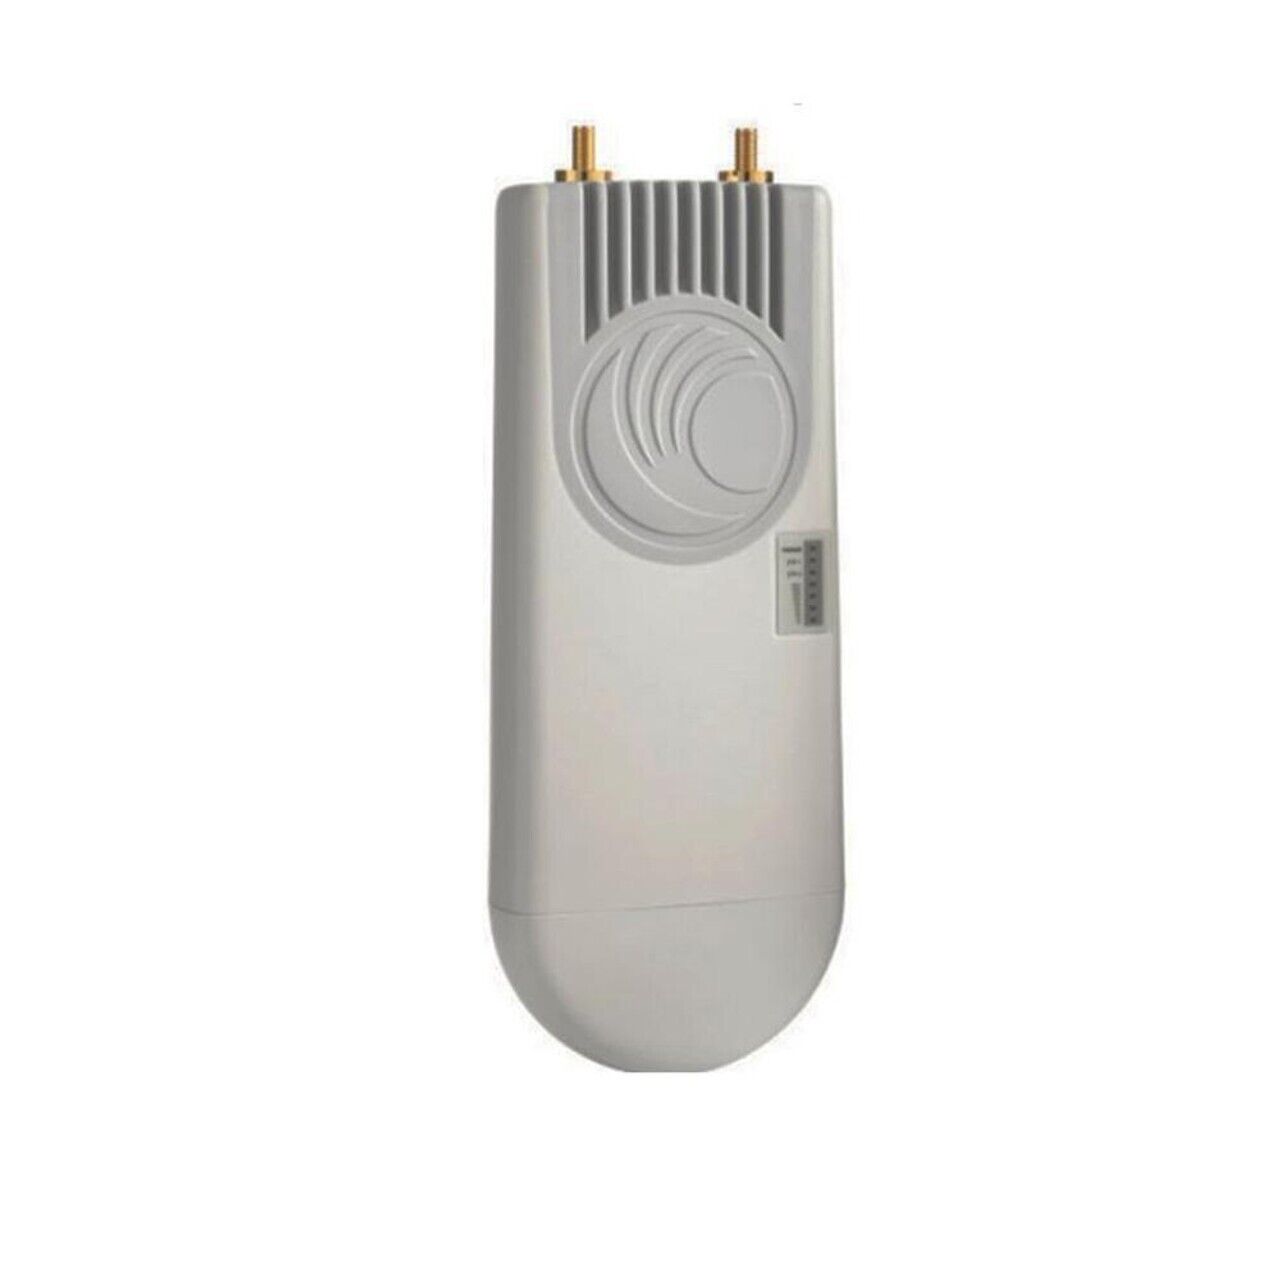 Cambium Networks C050900A011A ePMP 1000 5 GHz Connectorized Radio 2x2 MIMO PtMP